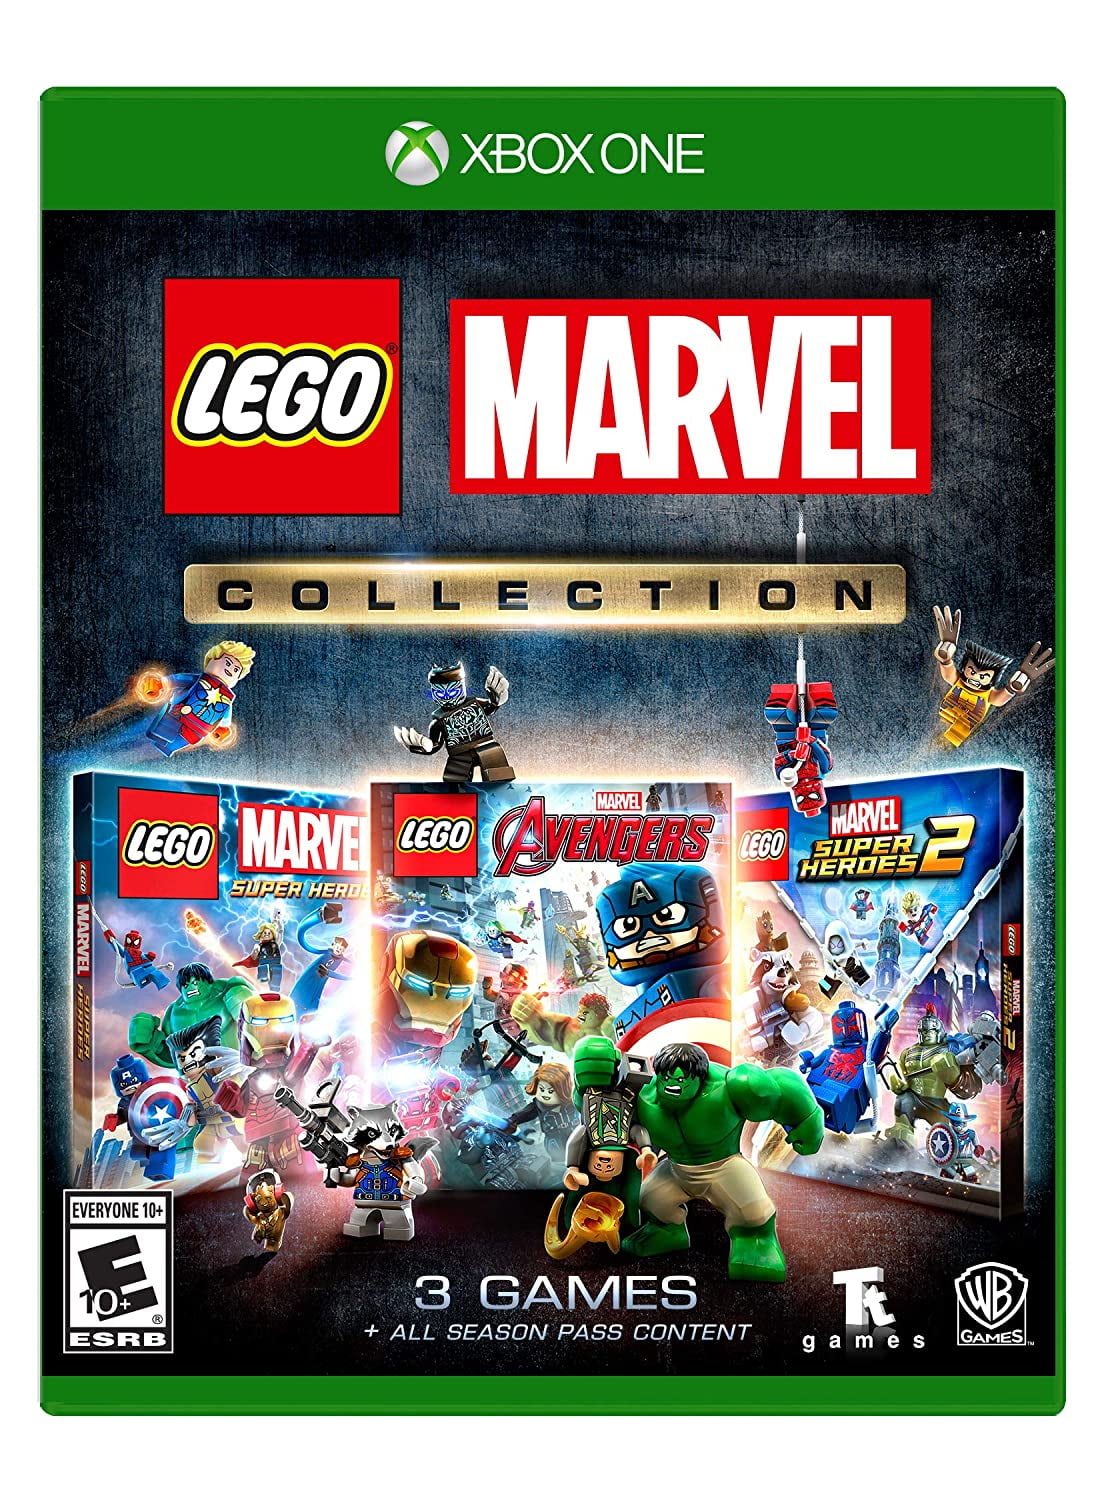 The Lego Marvel Collection Warner Bros Xbox One 00883929670499